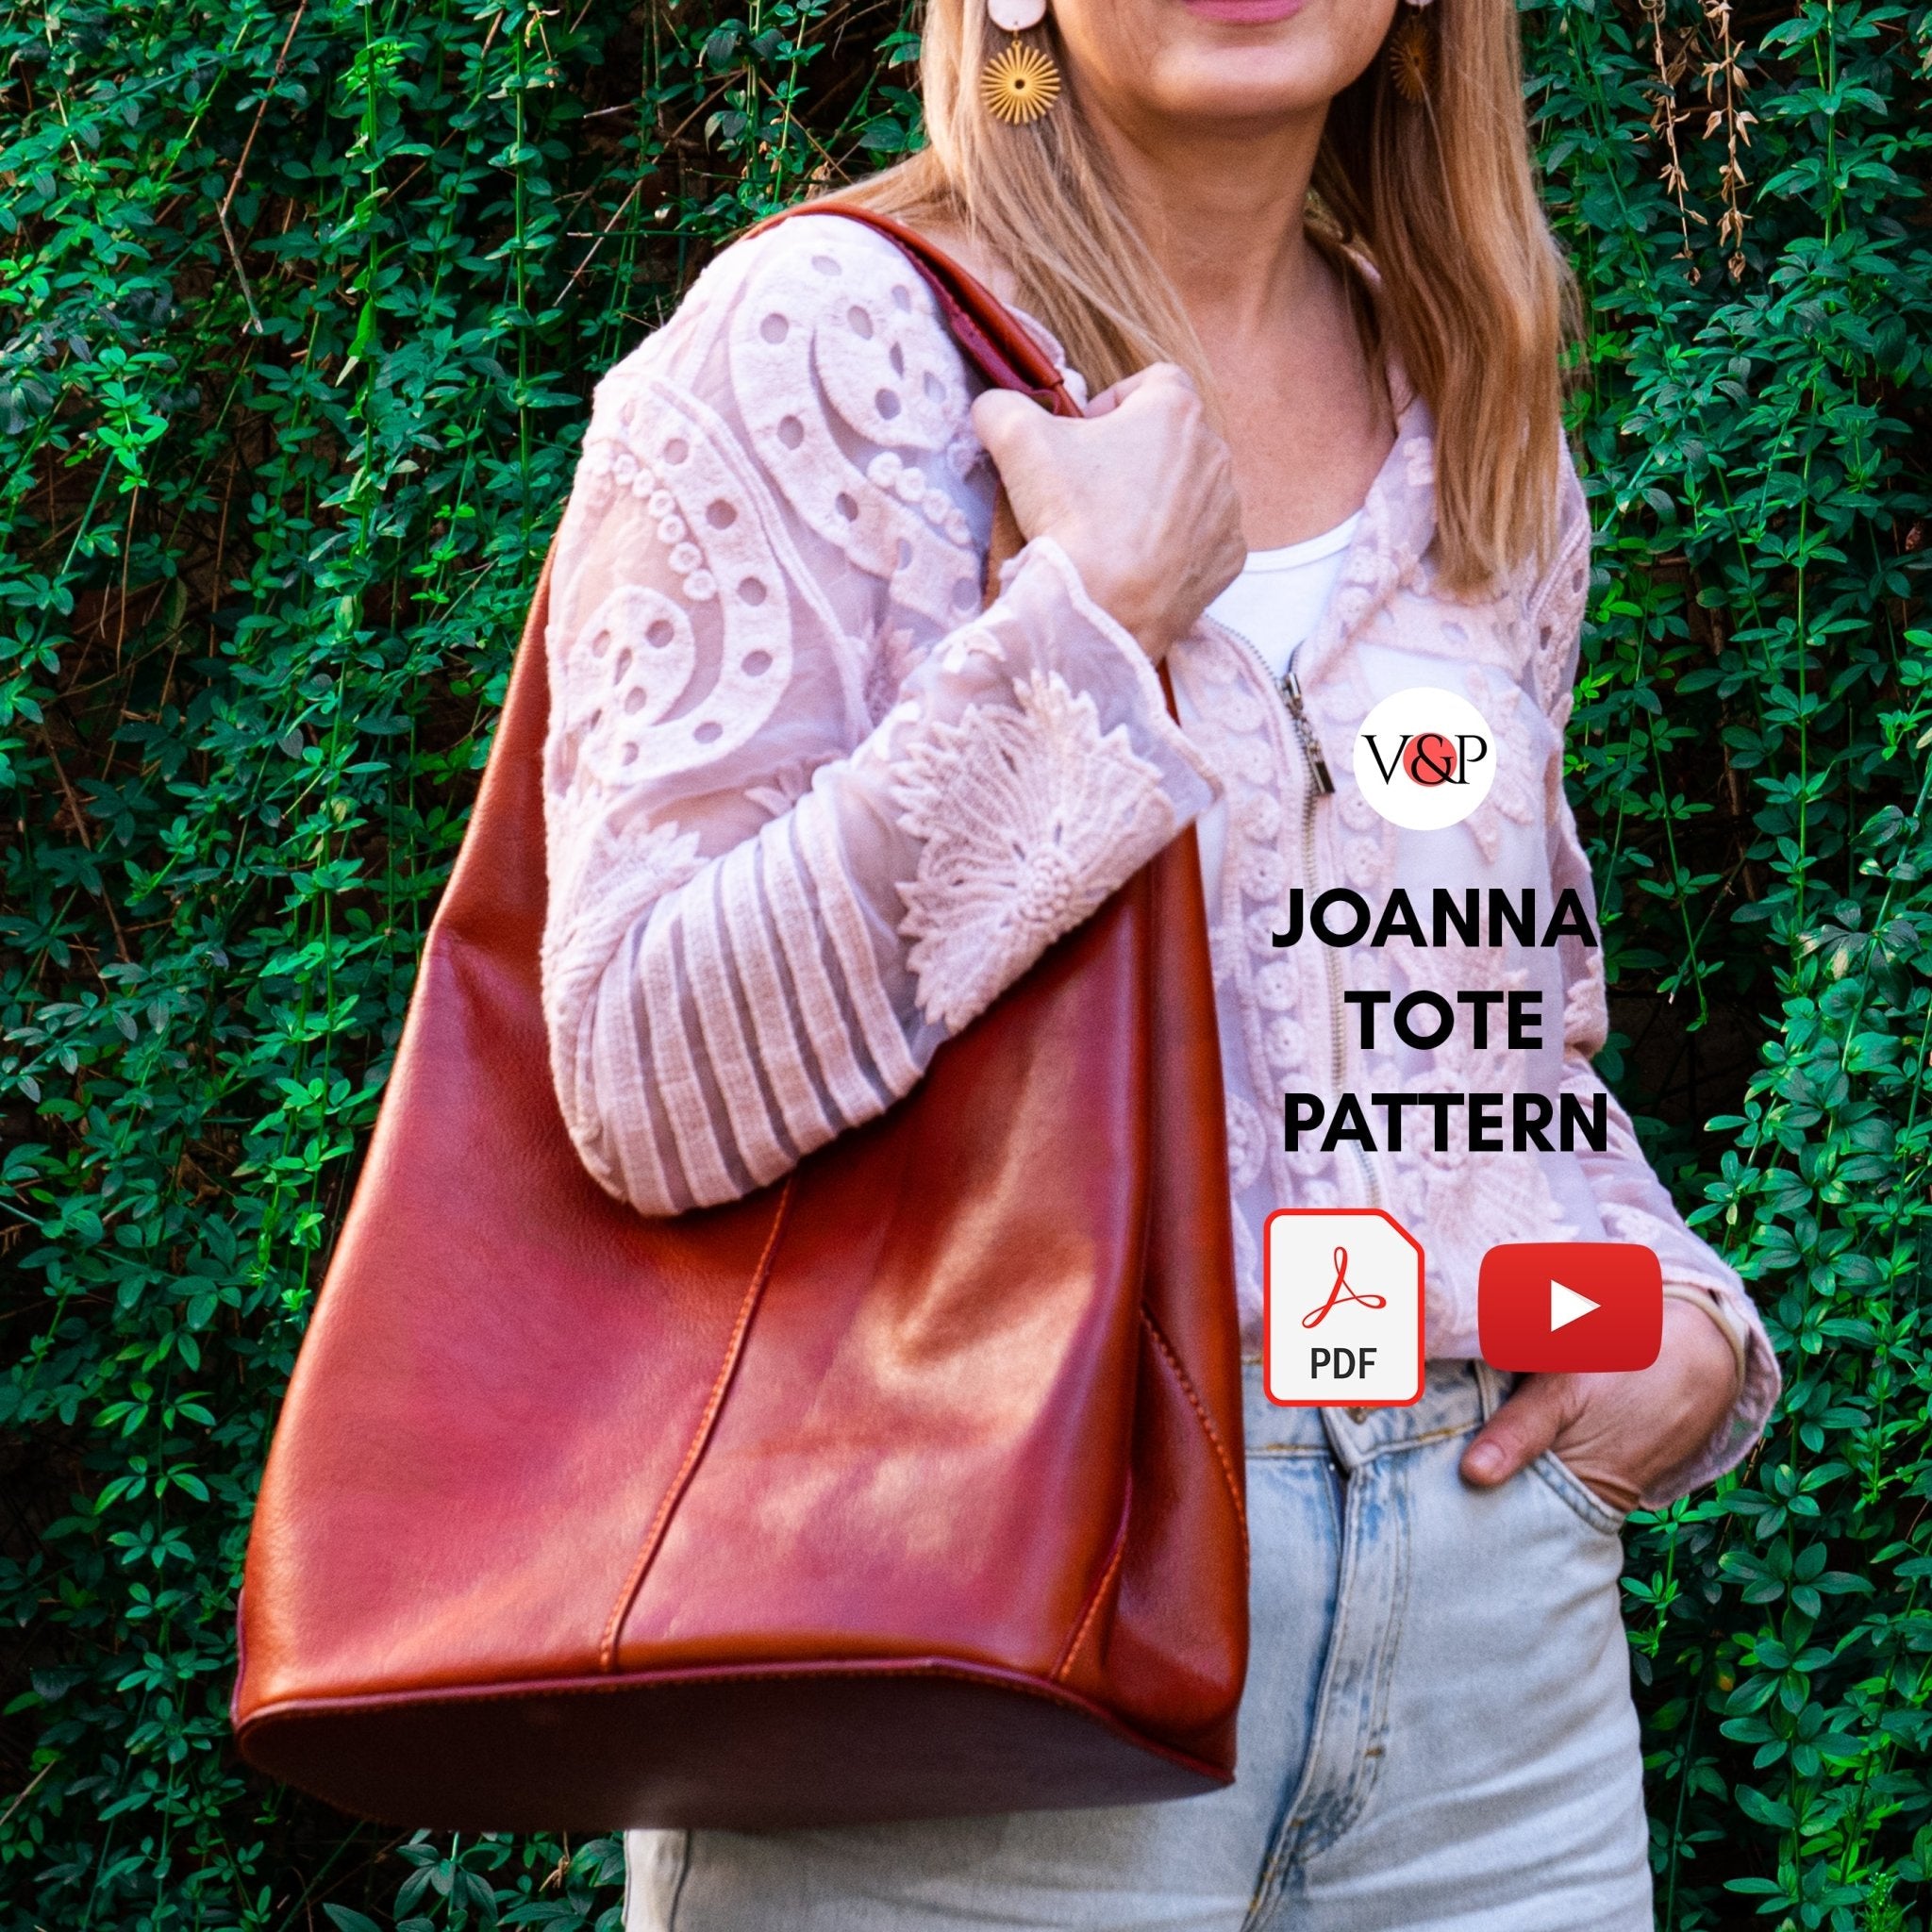 PDF Pattern and Instructional Video for Joanna Tote - Vasile and Pavel Leather Patterns